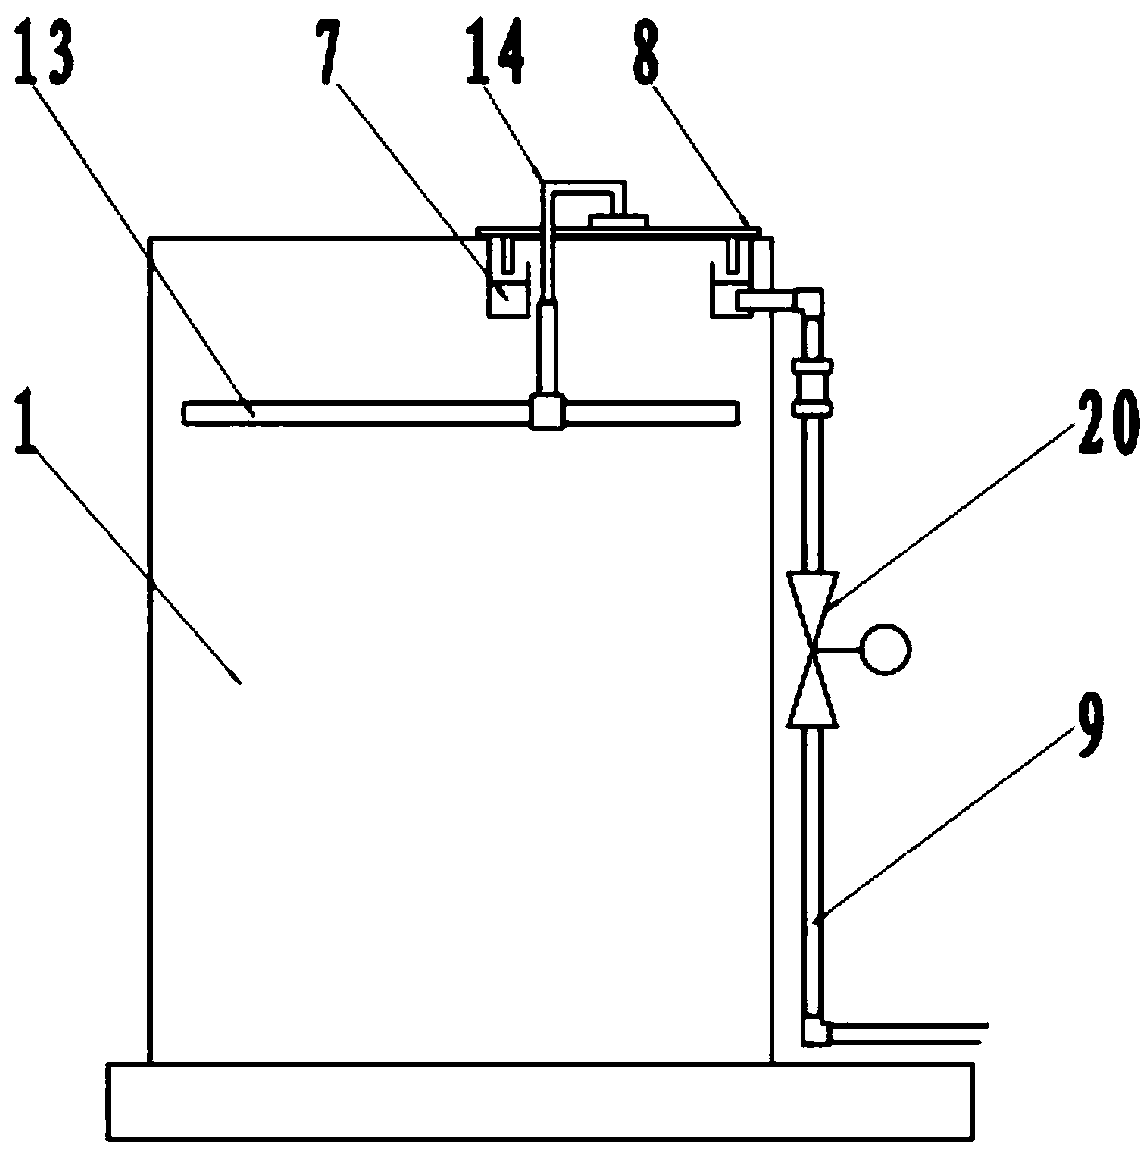 Drug dissolving device capable of achieving self-cleaning and odor diffusion